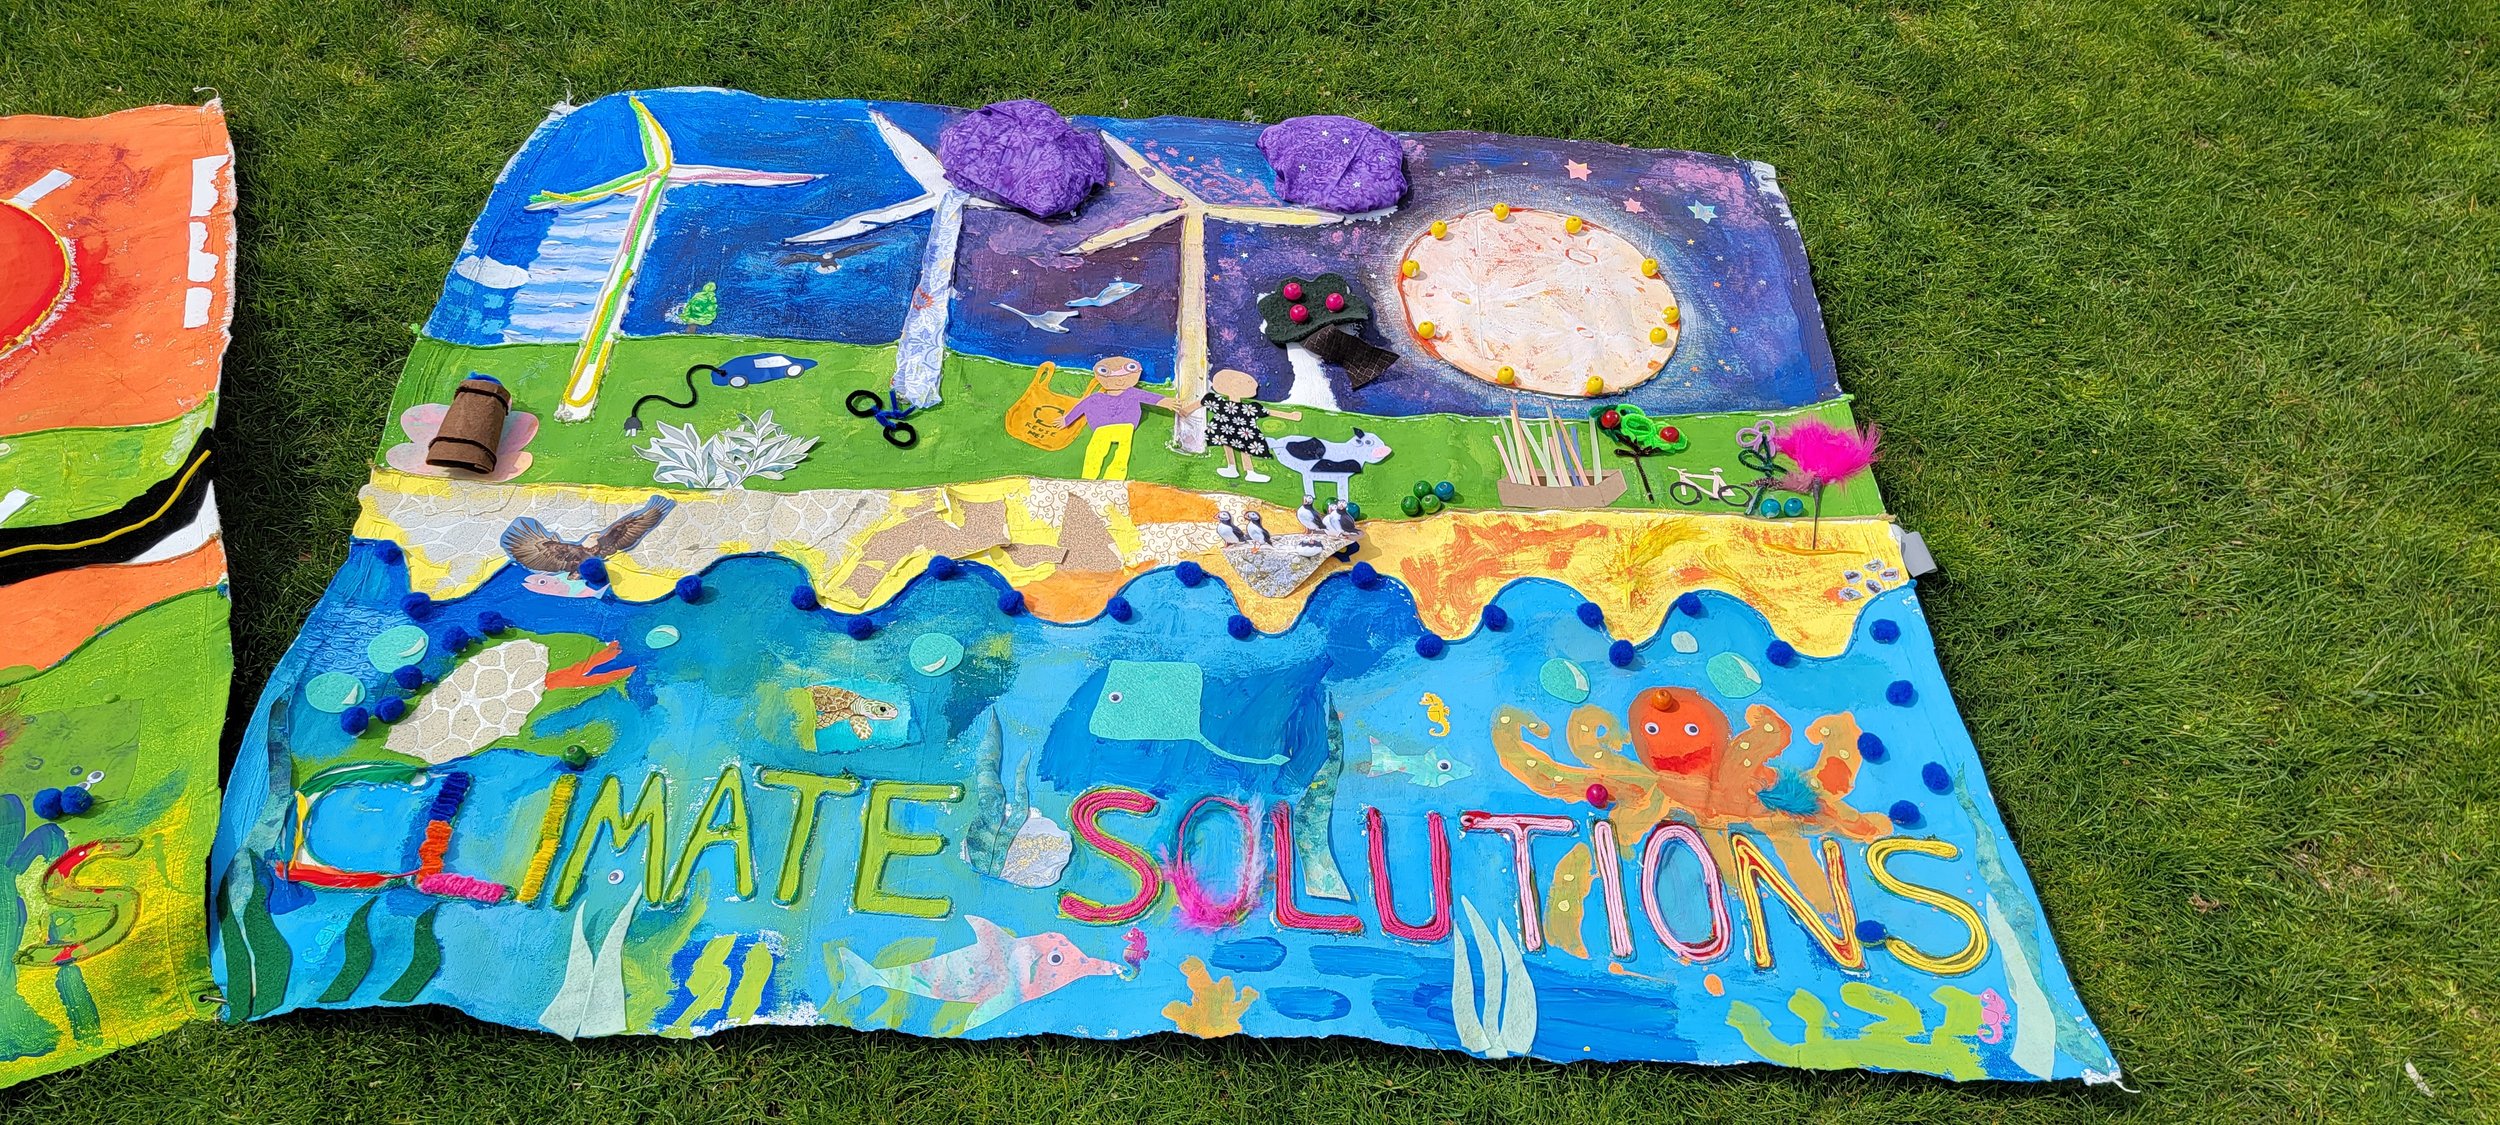 Artwork by Salem Sound Coastwatch with support from PEM’s Climate + Environment Initiative